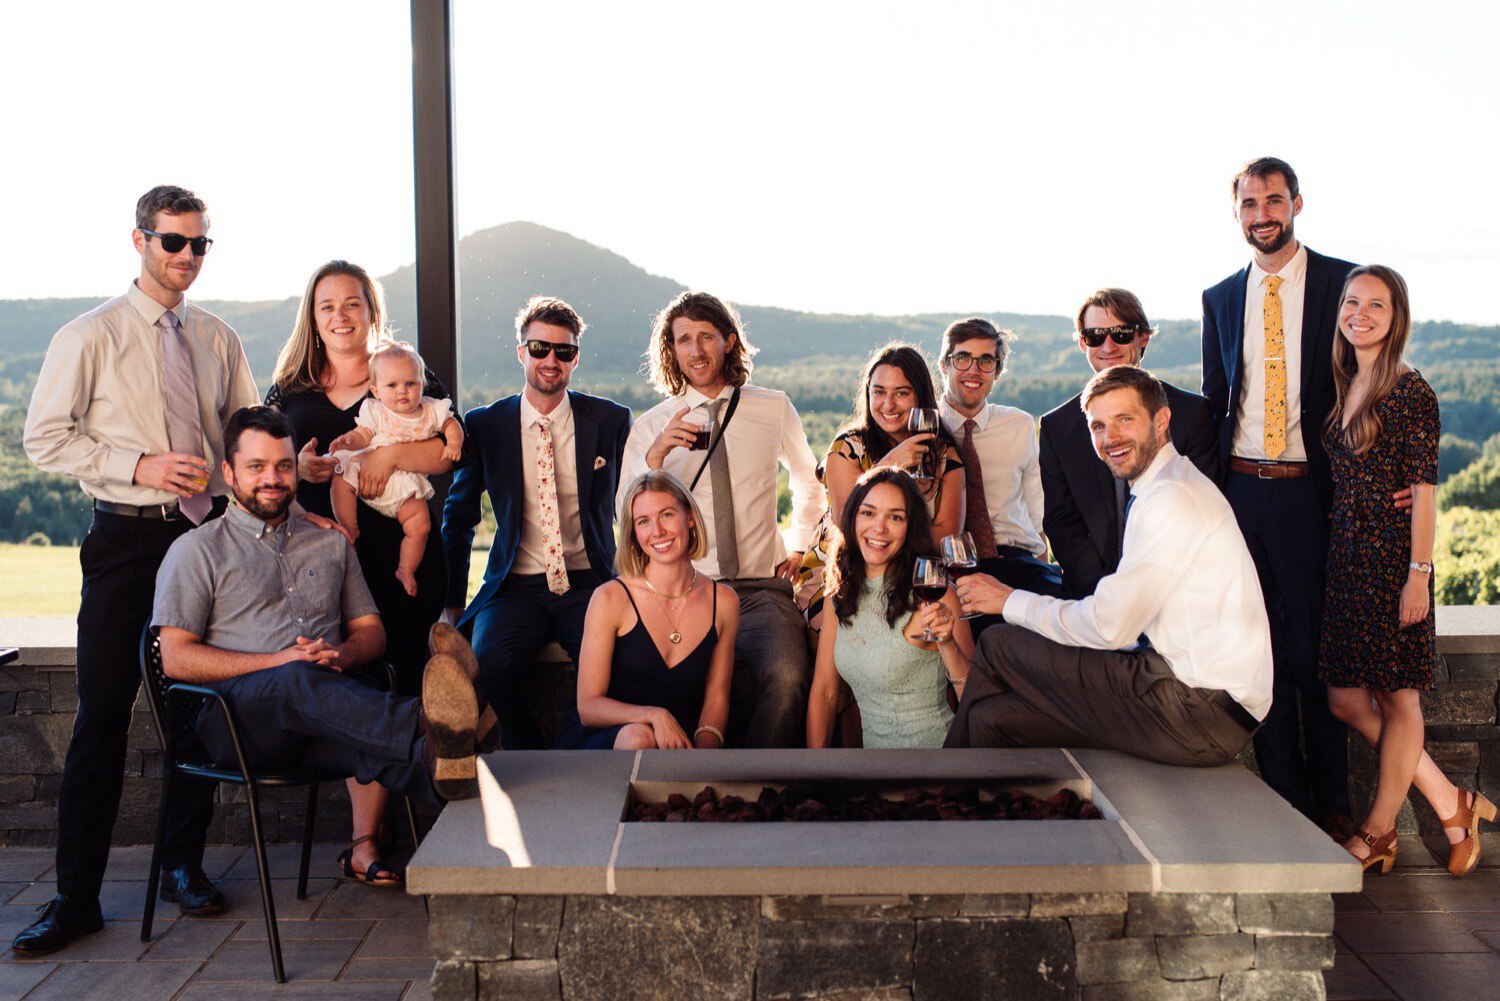 Family and friends pose for photos on patio at summer wedding